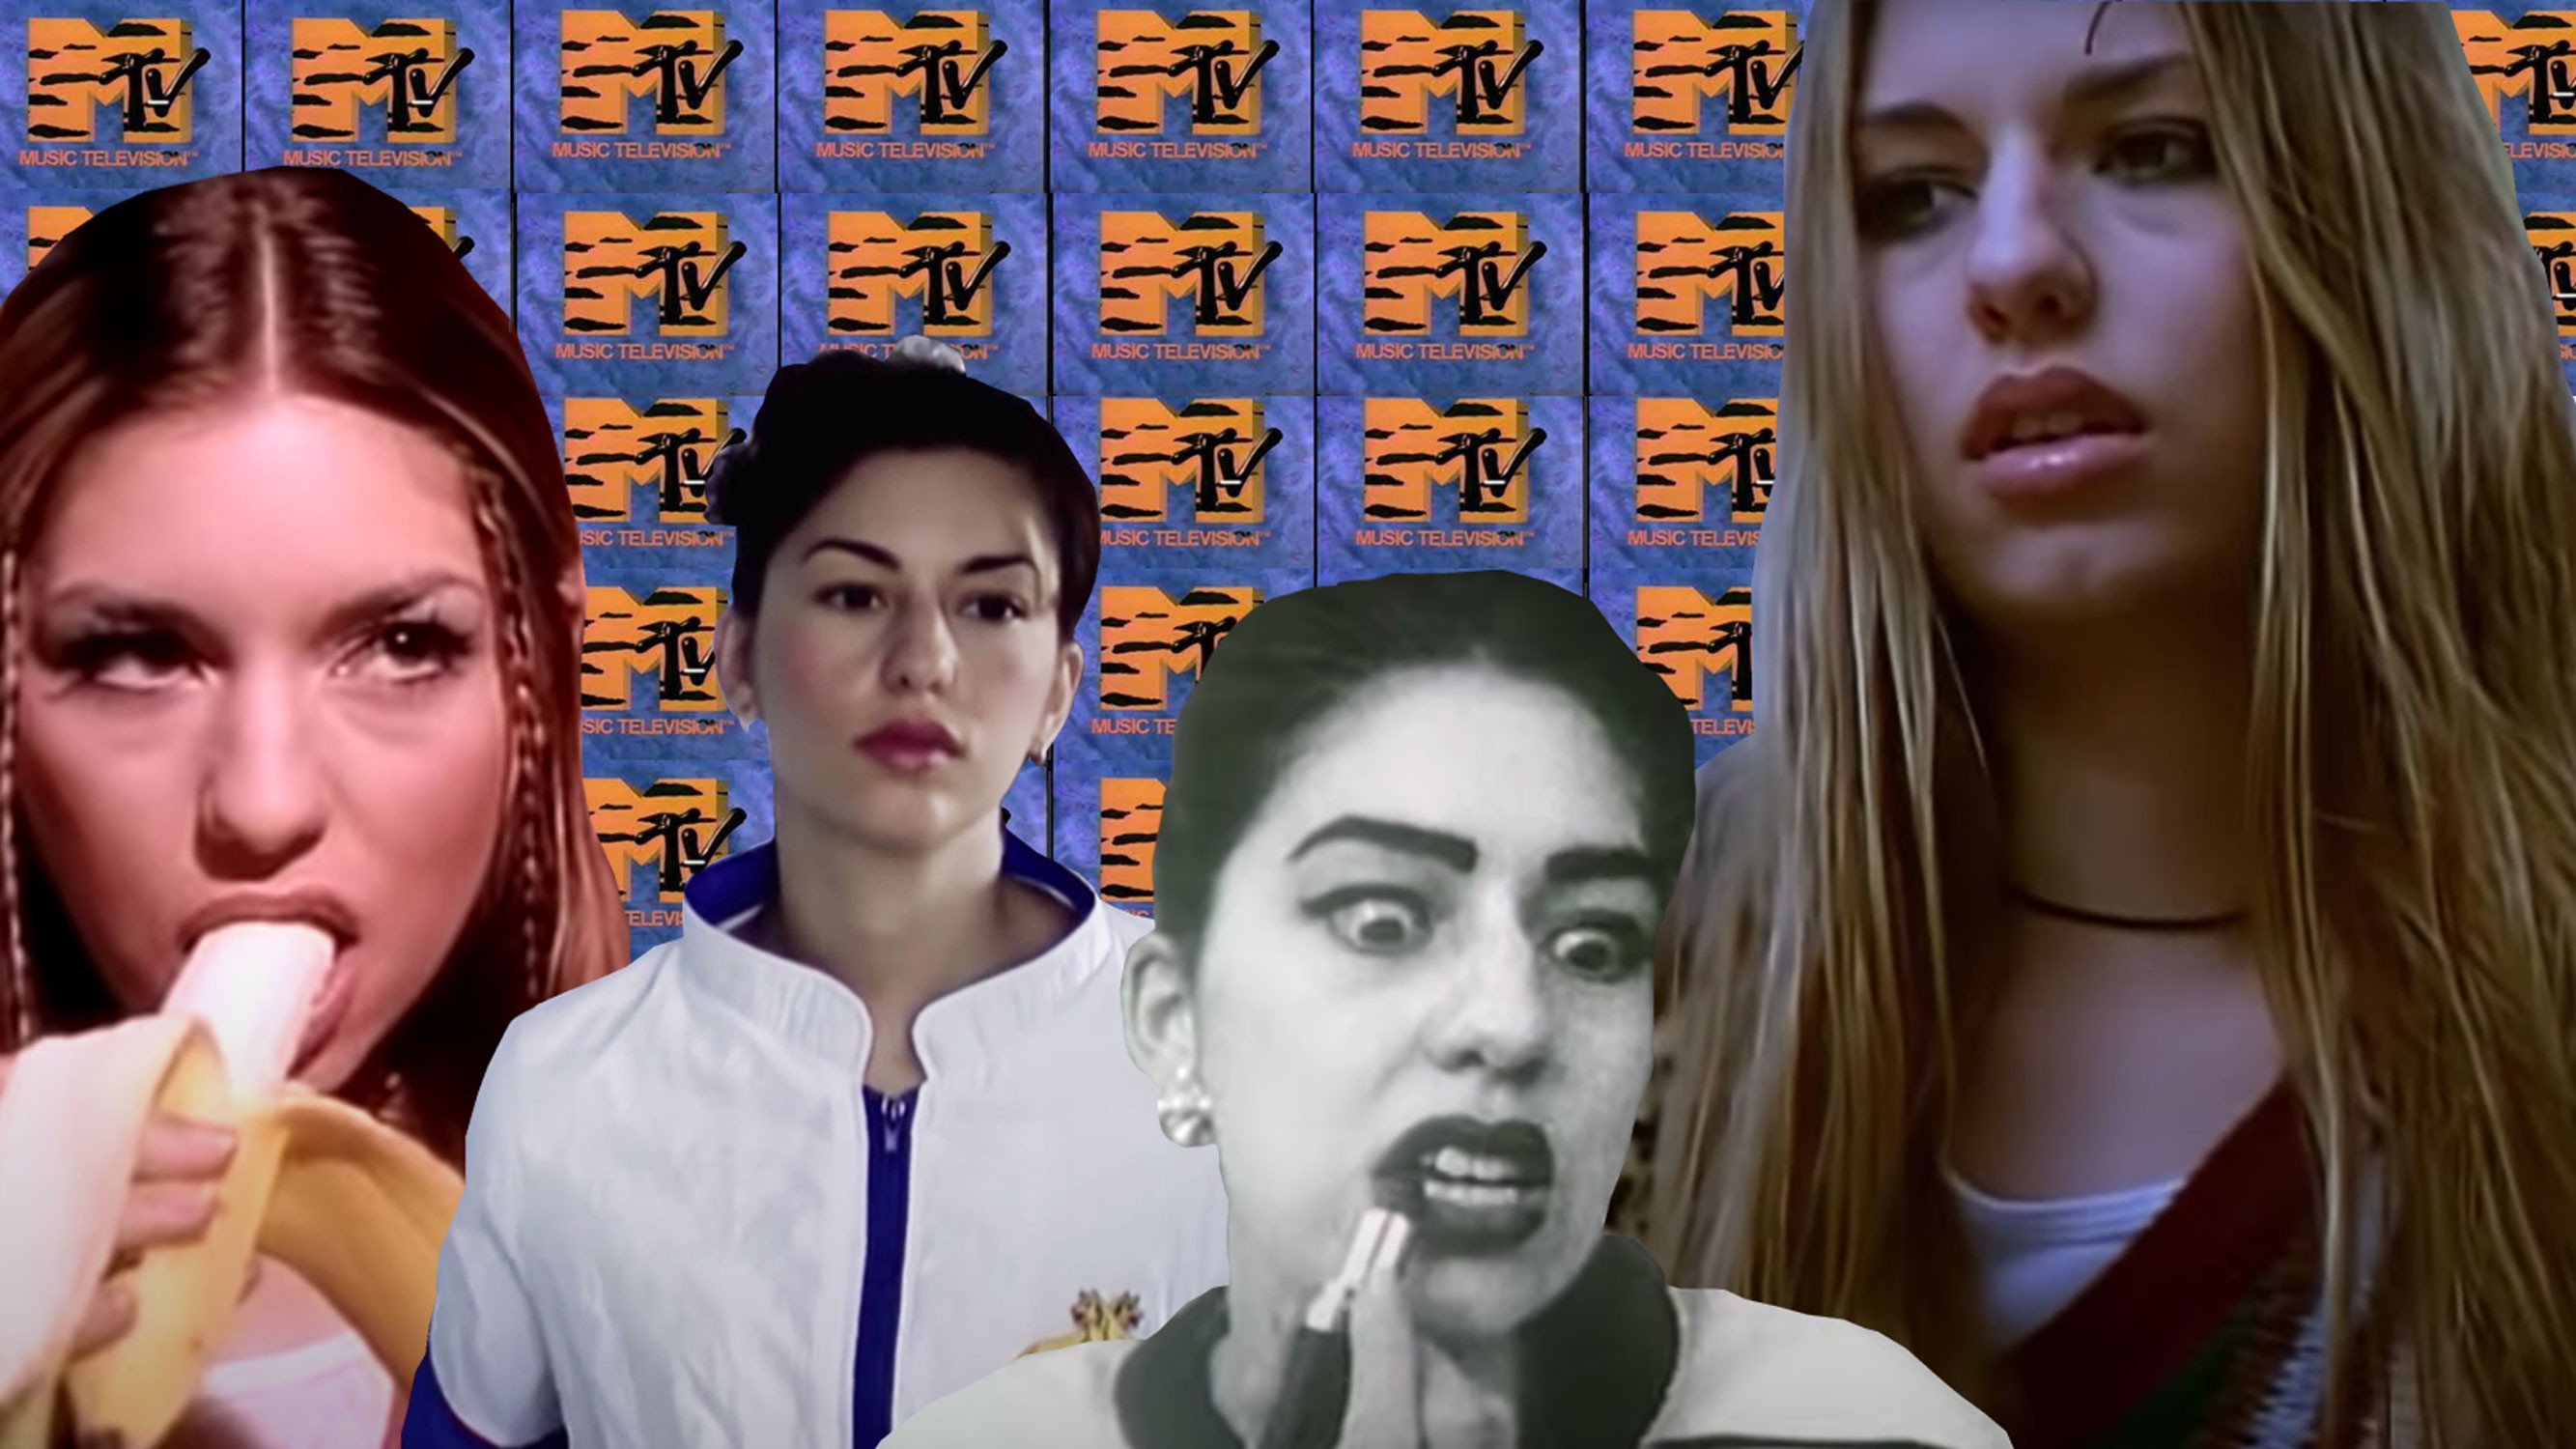 Sofia Coppola was the queen of 90s music video cameos